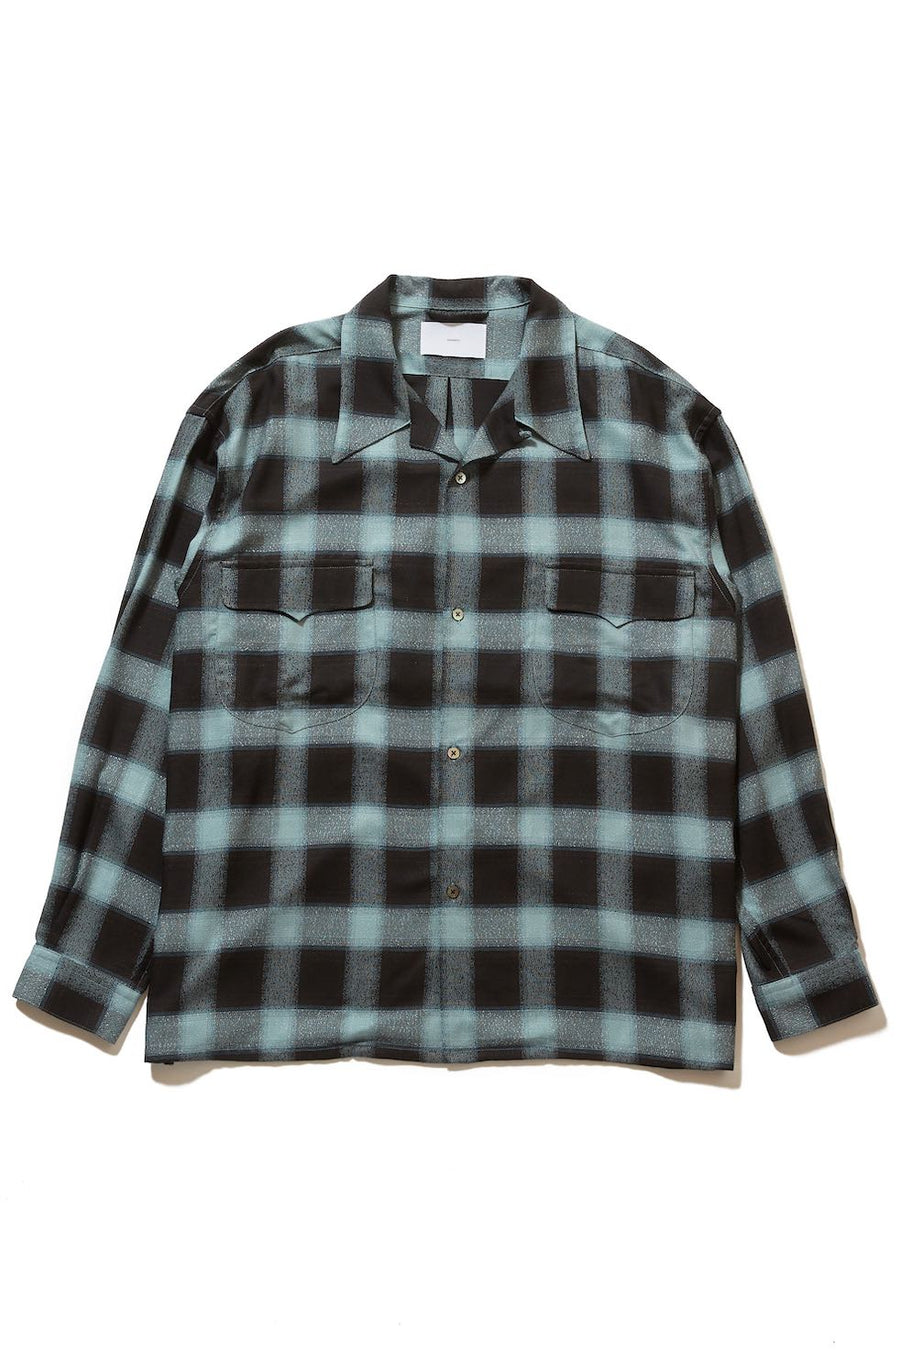 SUGARHILL(シュガーヒル)のOMBRE PLAID OPEN COLLAR BLOUSE TURQUOISE 